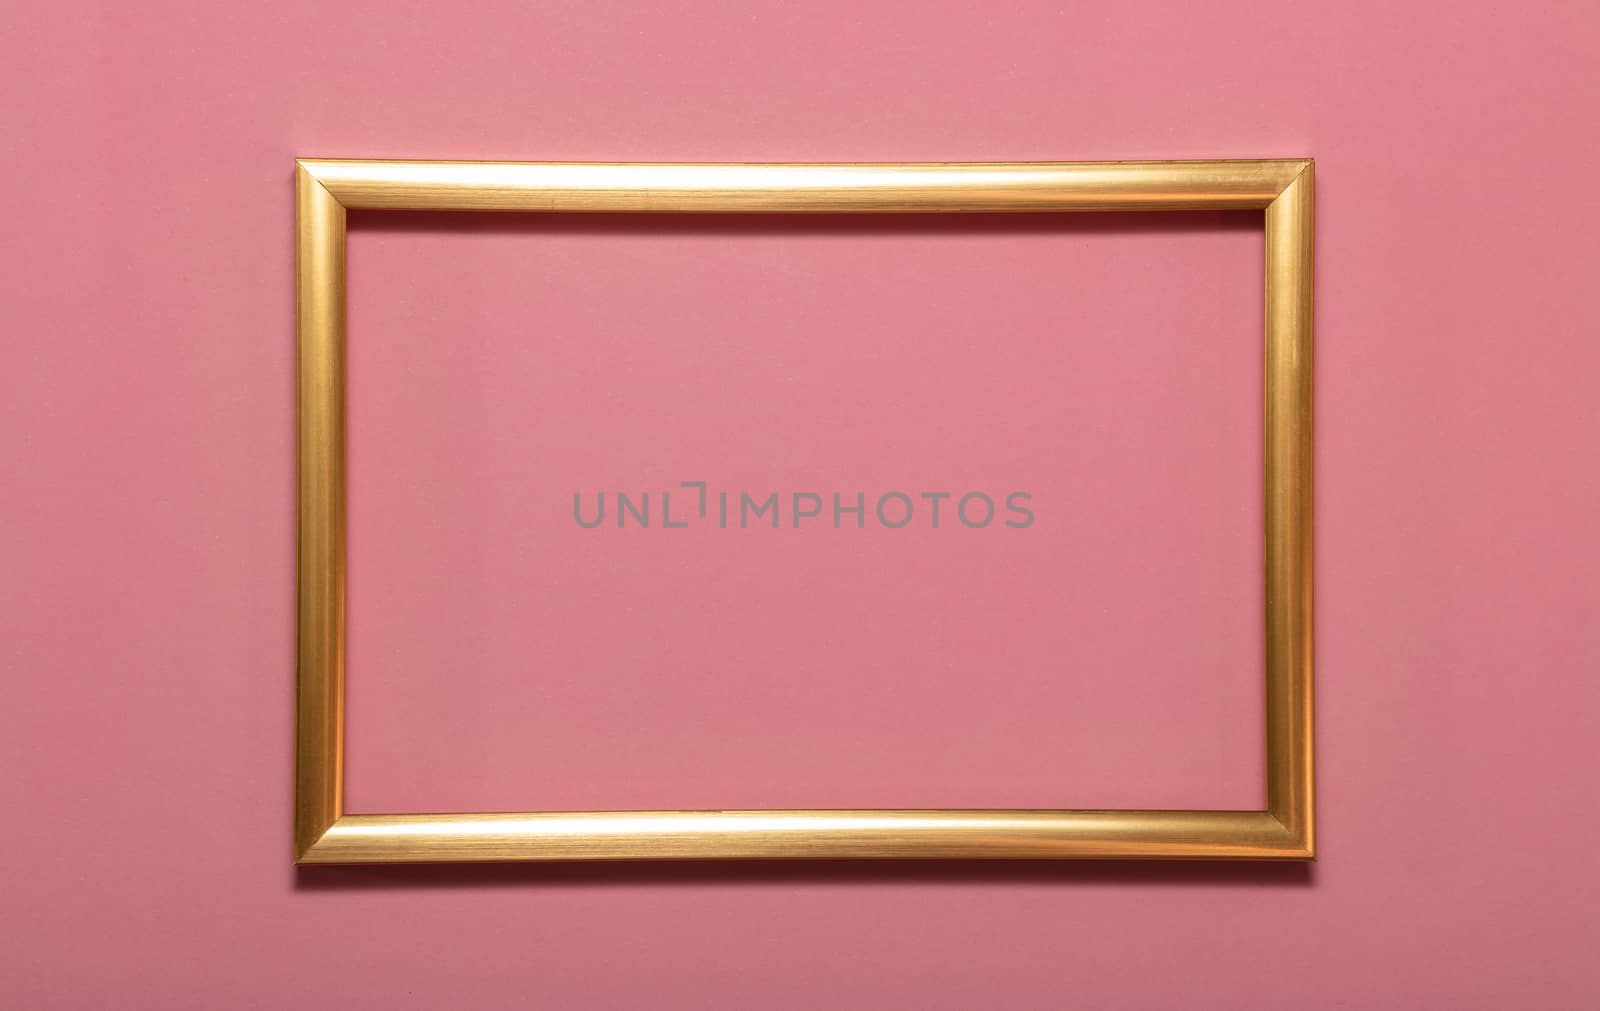 Golden empty frame picture on pink background . Copy space for text. Holiday card concept. Mock up. Greeting. Mother's Day. St Valentine's Day. Love and devotion concepts.